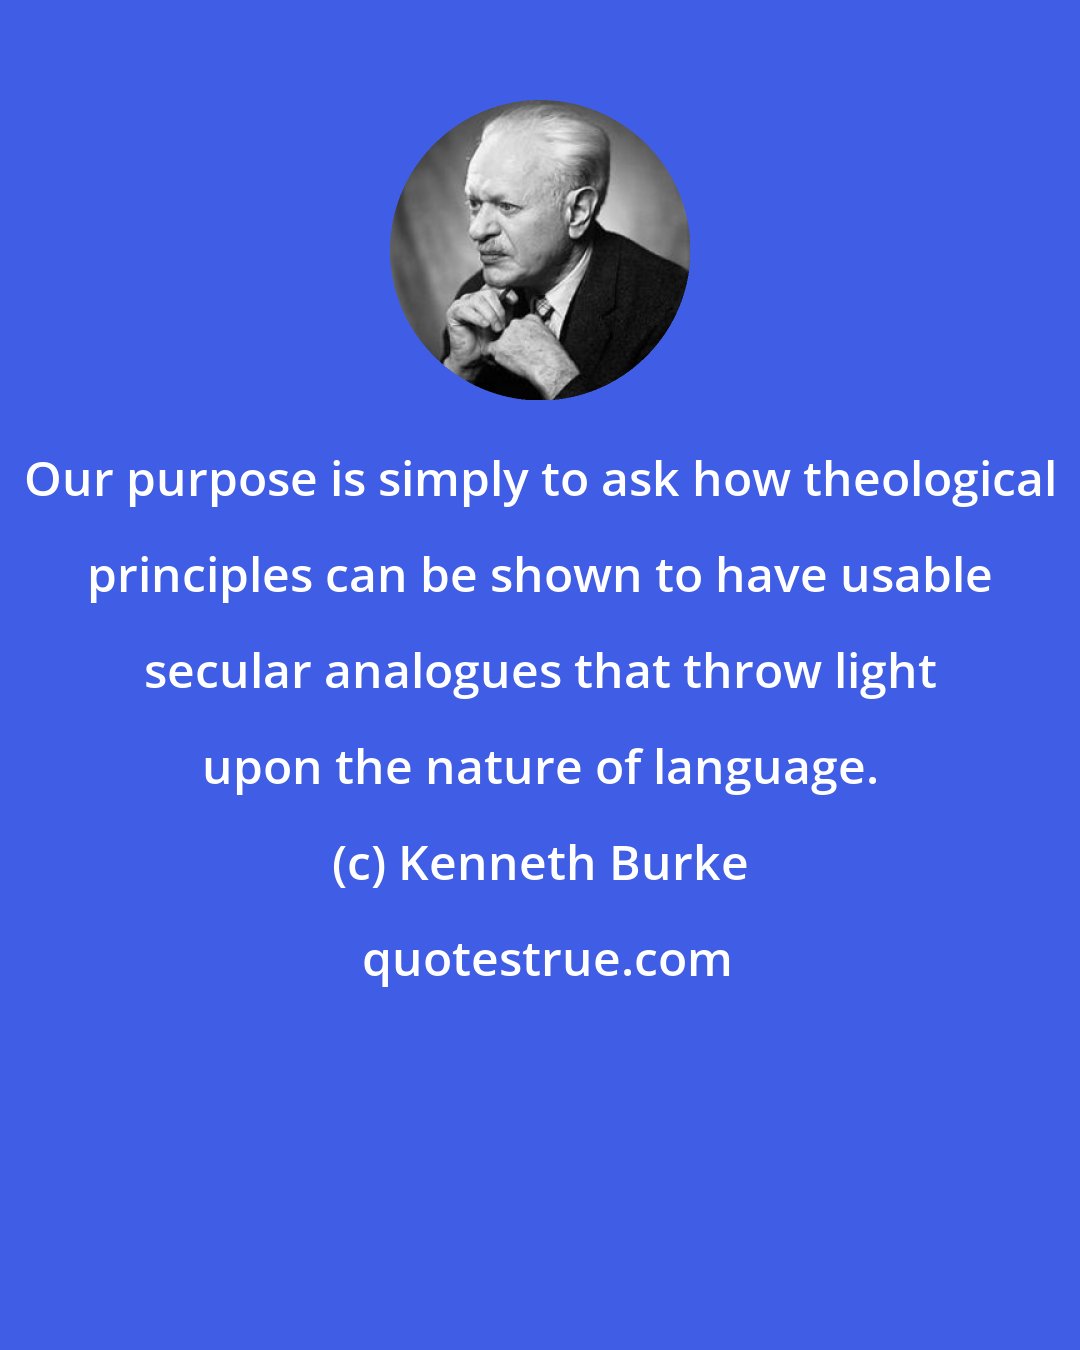 Kenneth Burke: Our purpose is simply to ask how theological principles can be shown to have usable secular analogues that throw light upon the nature of language.